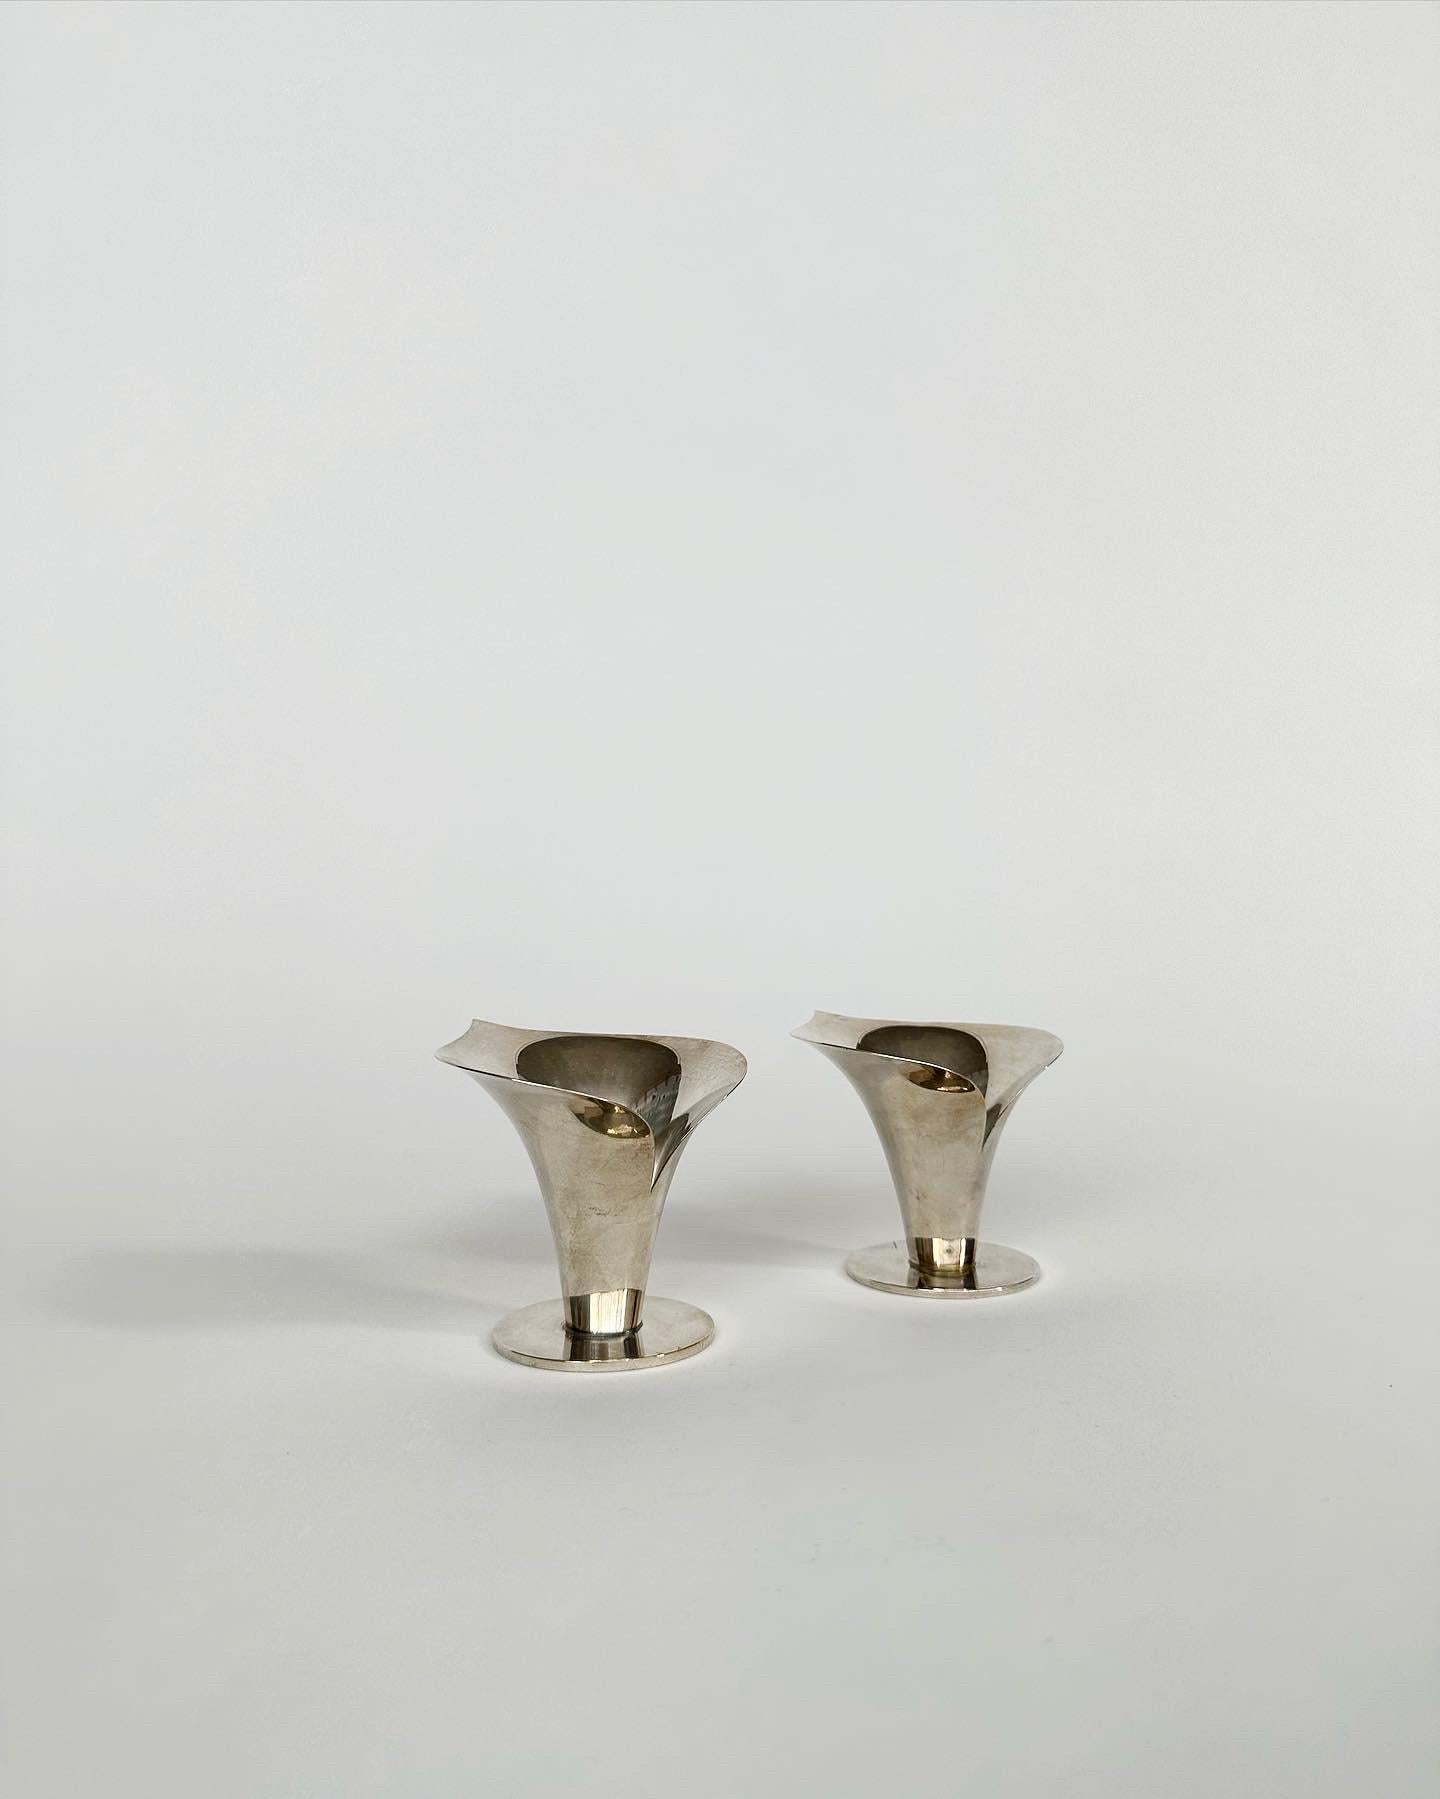 Rare pair of Carl Einar Borgström Calla Lily candle holders in nickel silver plated brass, made by Ystad-Metall in Sweden in the 1940s. 

These were designed for the 1939 New York world fair. 
Both are stamped with the makers mark and the artists